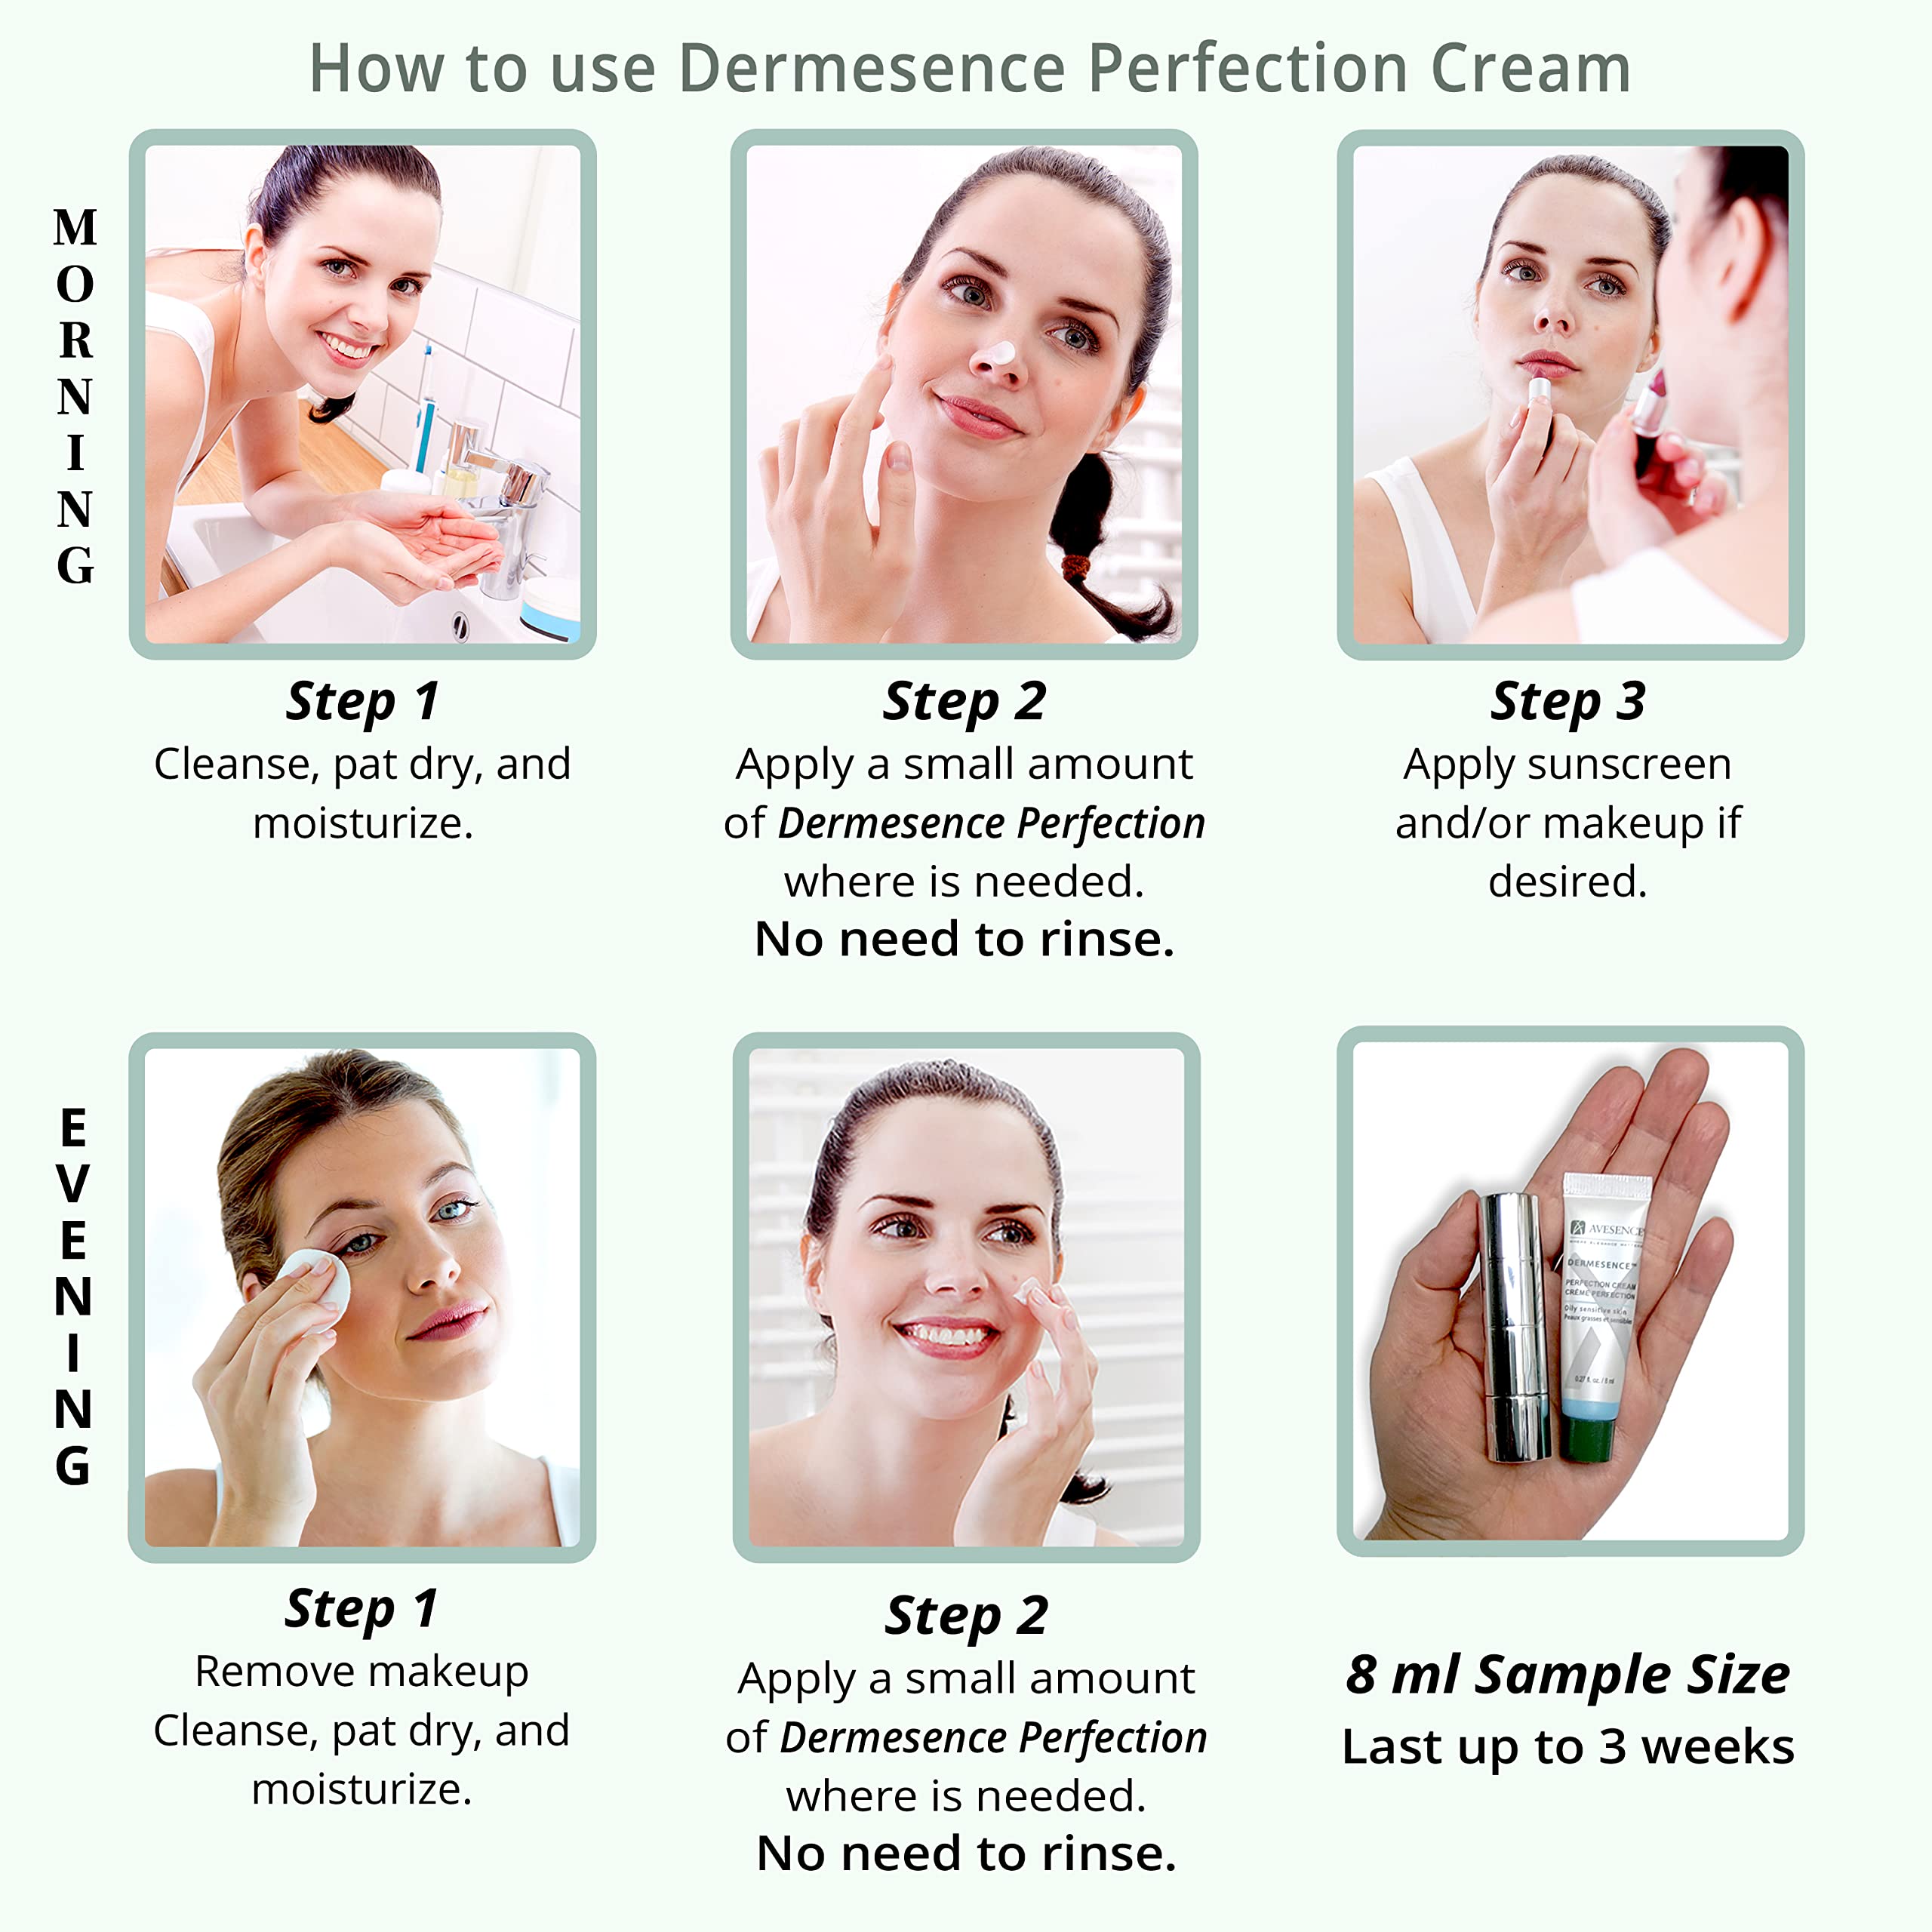 Dermesence Perfection, Matte Finish Primer for Oily, Mixed, Acne Prone, Sensitive Skin. For All-Day Smudge-Free Makeup. Minimize Pore Sizes & Pimples. Travel Size 0.27 fl. oz.